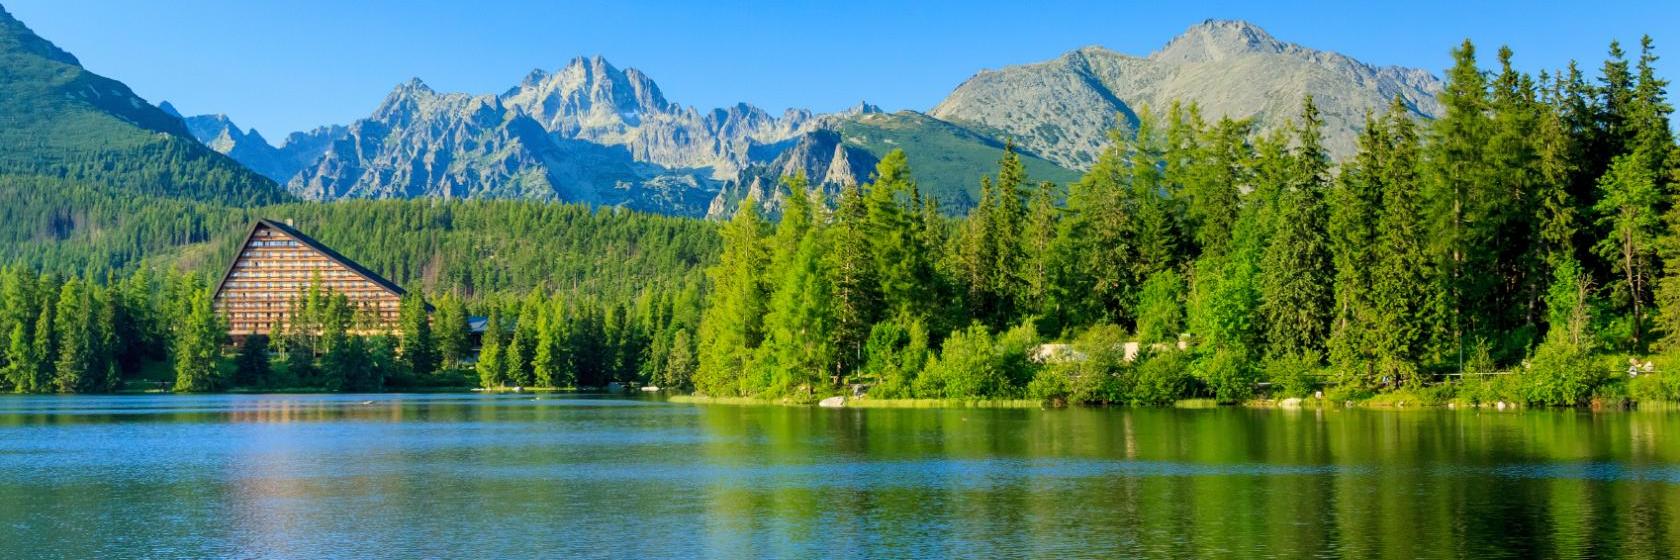 The 10 best hotels & places to stay in Vysoke Tatry - Strbske Pleso,  Slovakia - Vysoke Tatry - Strbske Pleso hotels